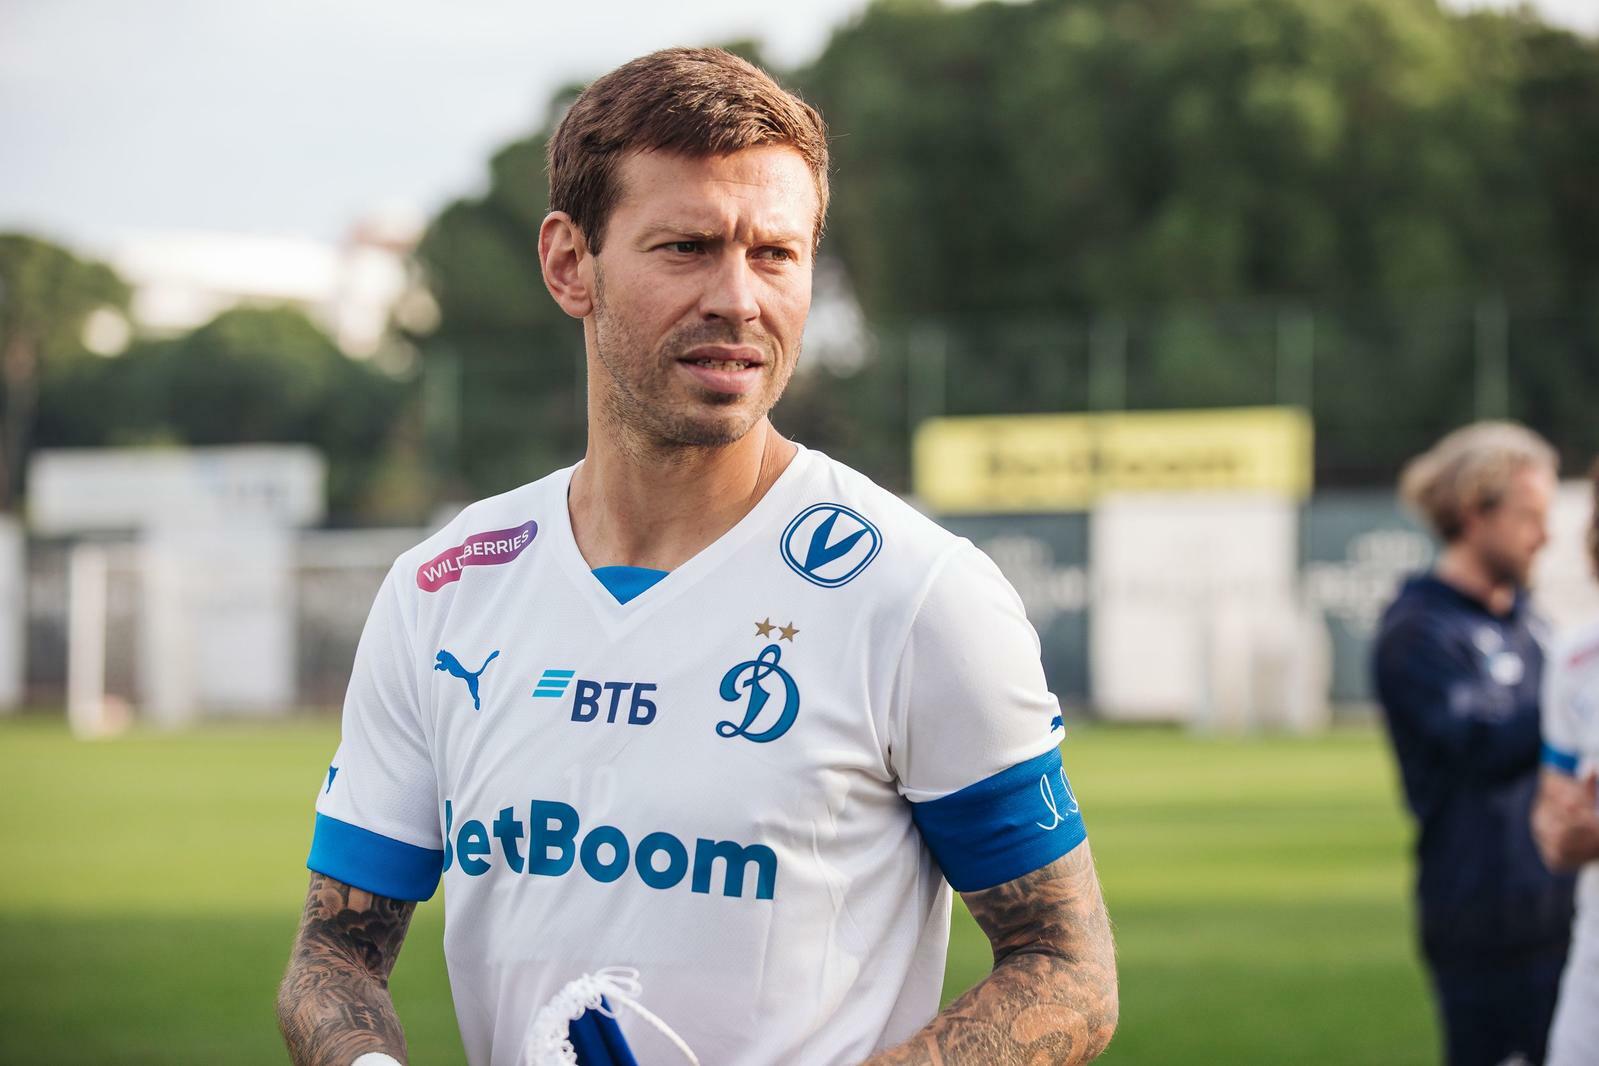 FC Dynamo Moscow News | Fedor Smolov: "It's great to see familiar faces of fans at the training camps, a cool tradition." Official Dynamo Club website.